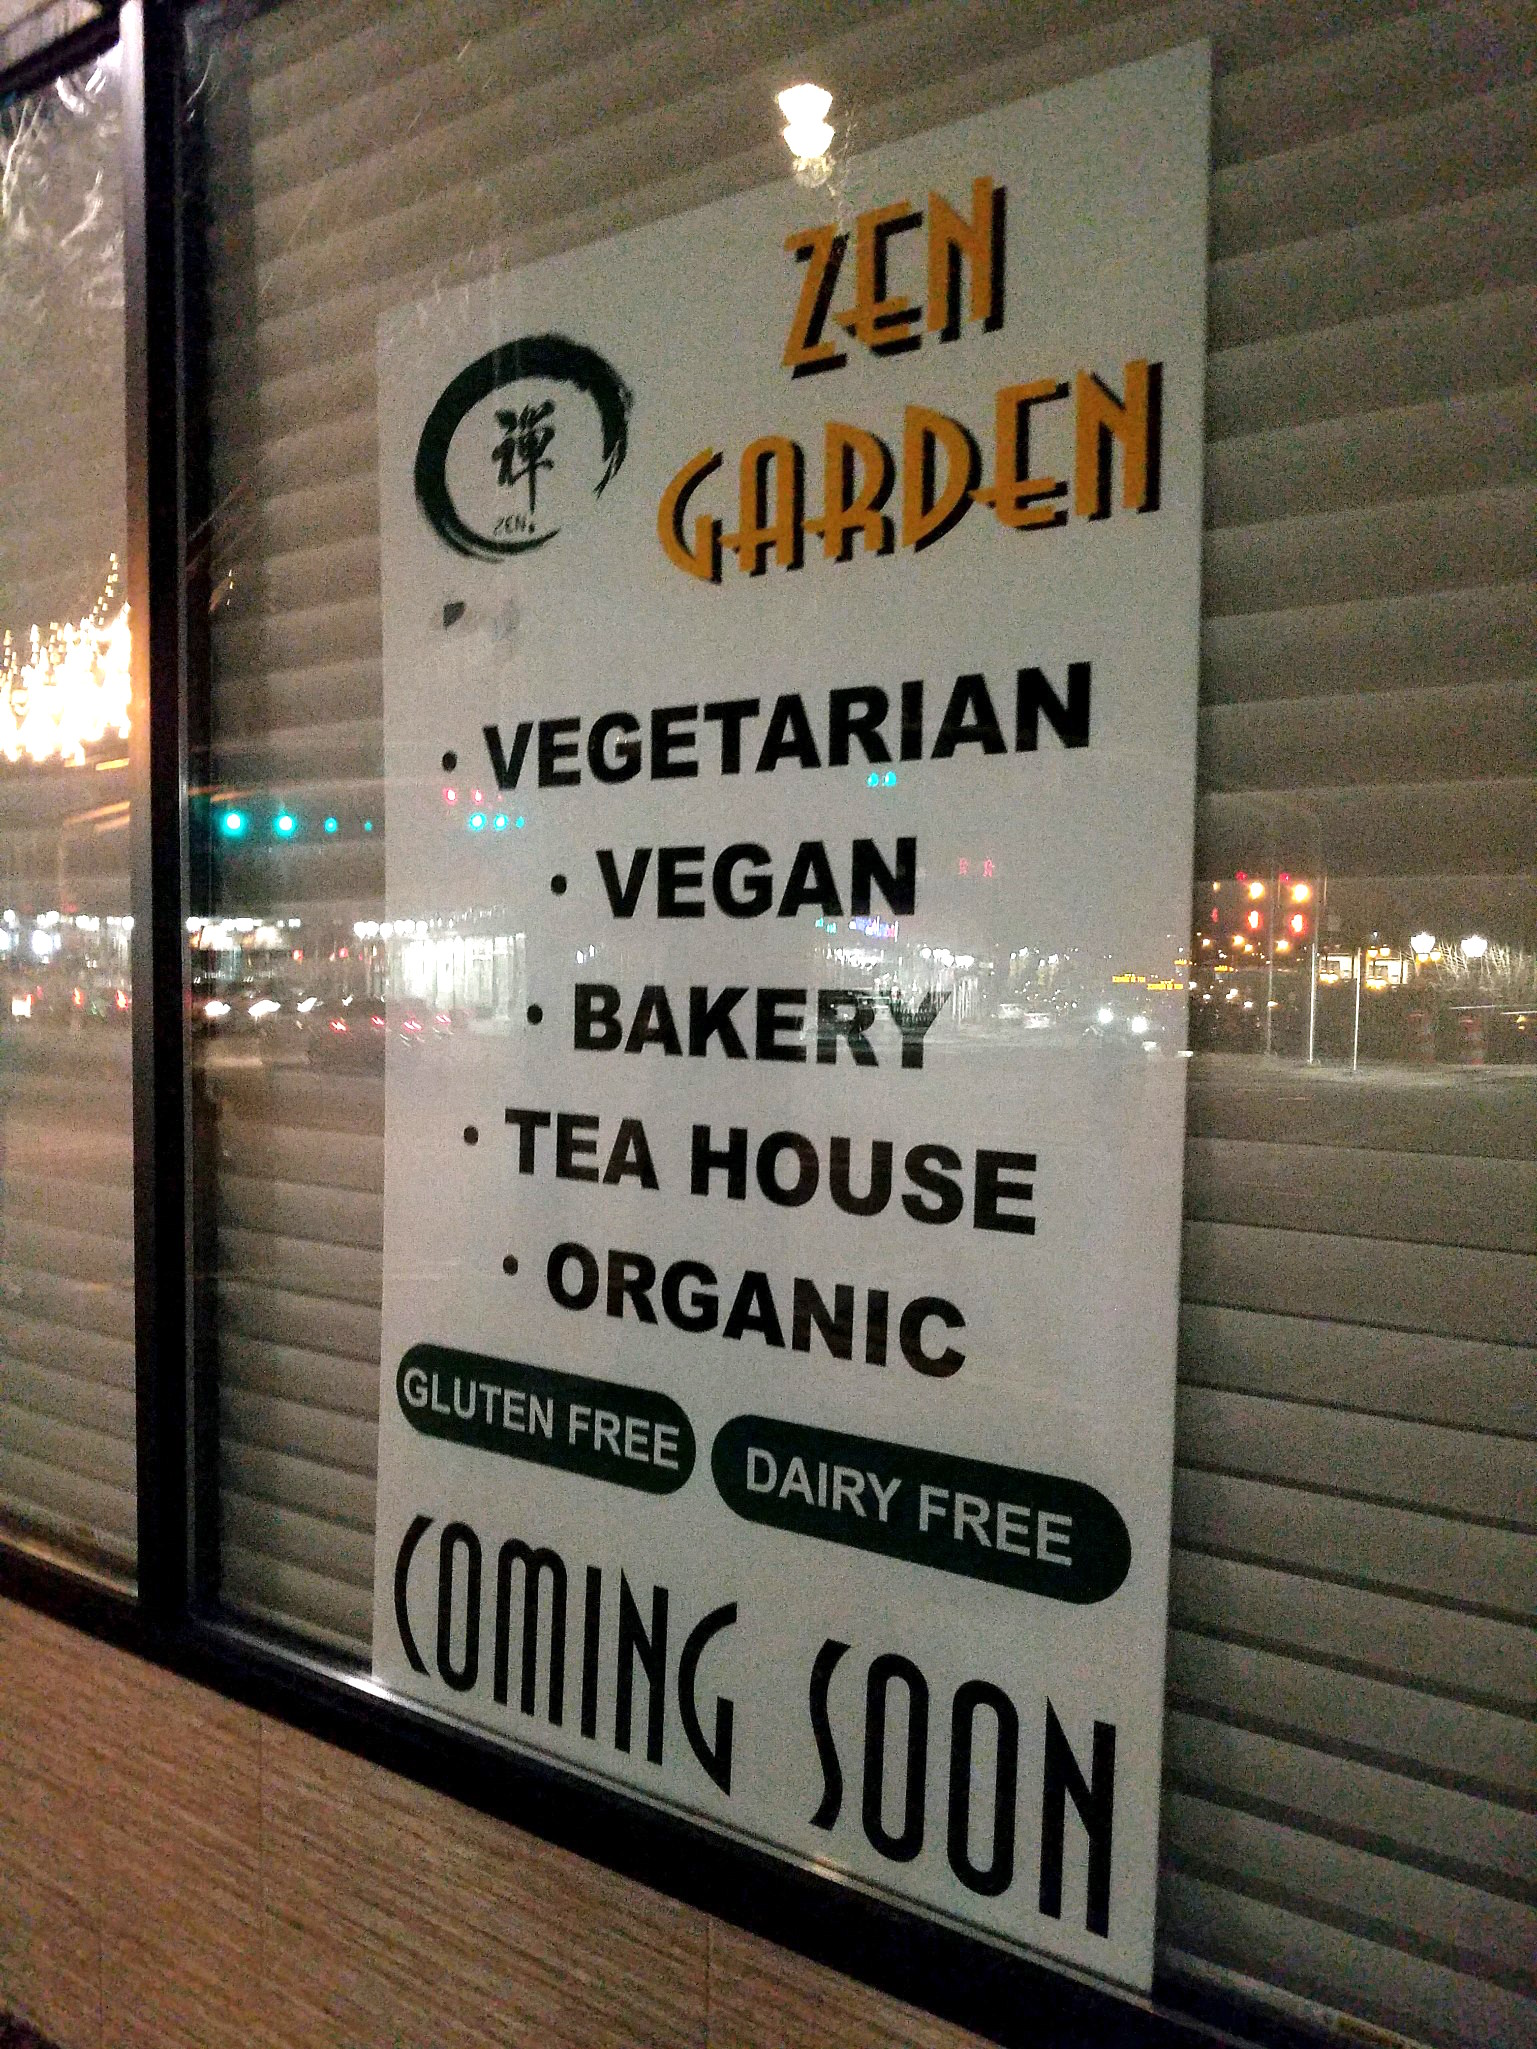 Zen Garden, a vegetarian and vegan eatery, will be succeeding Royal Tea House at 1 Great Neck Road. The owner said she hopes to open in early January. (Photo by Janelle Clausen)